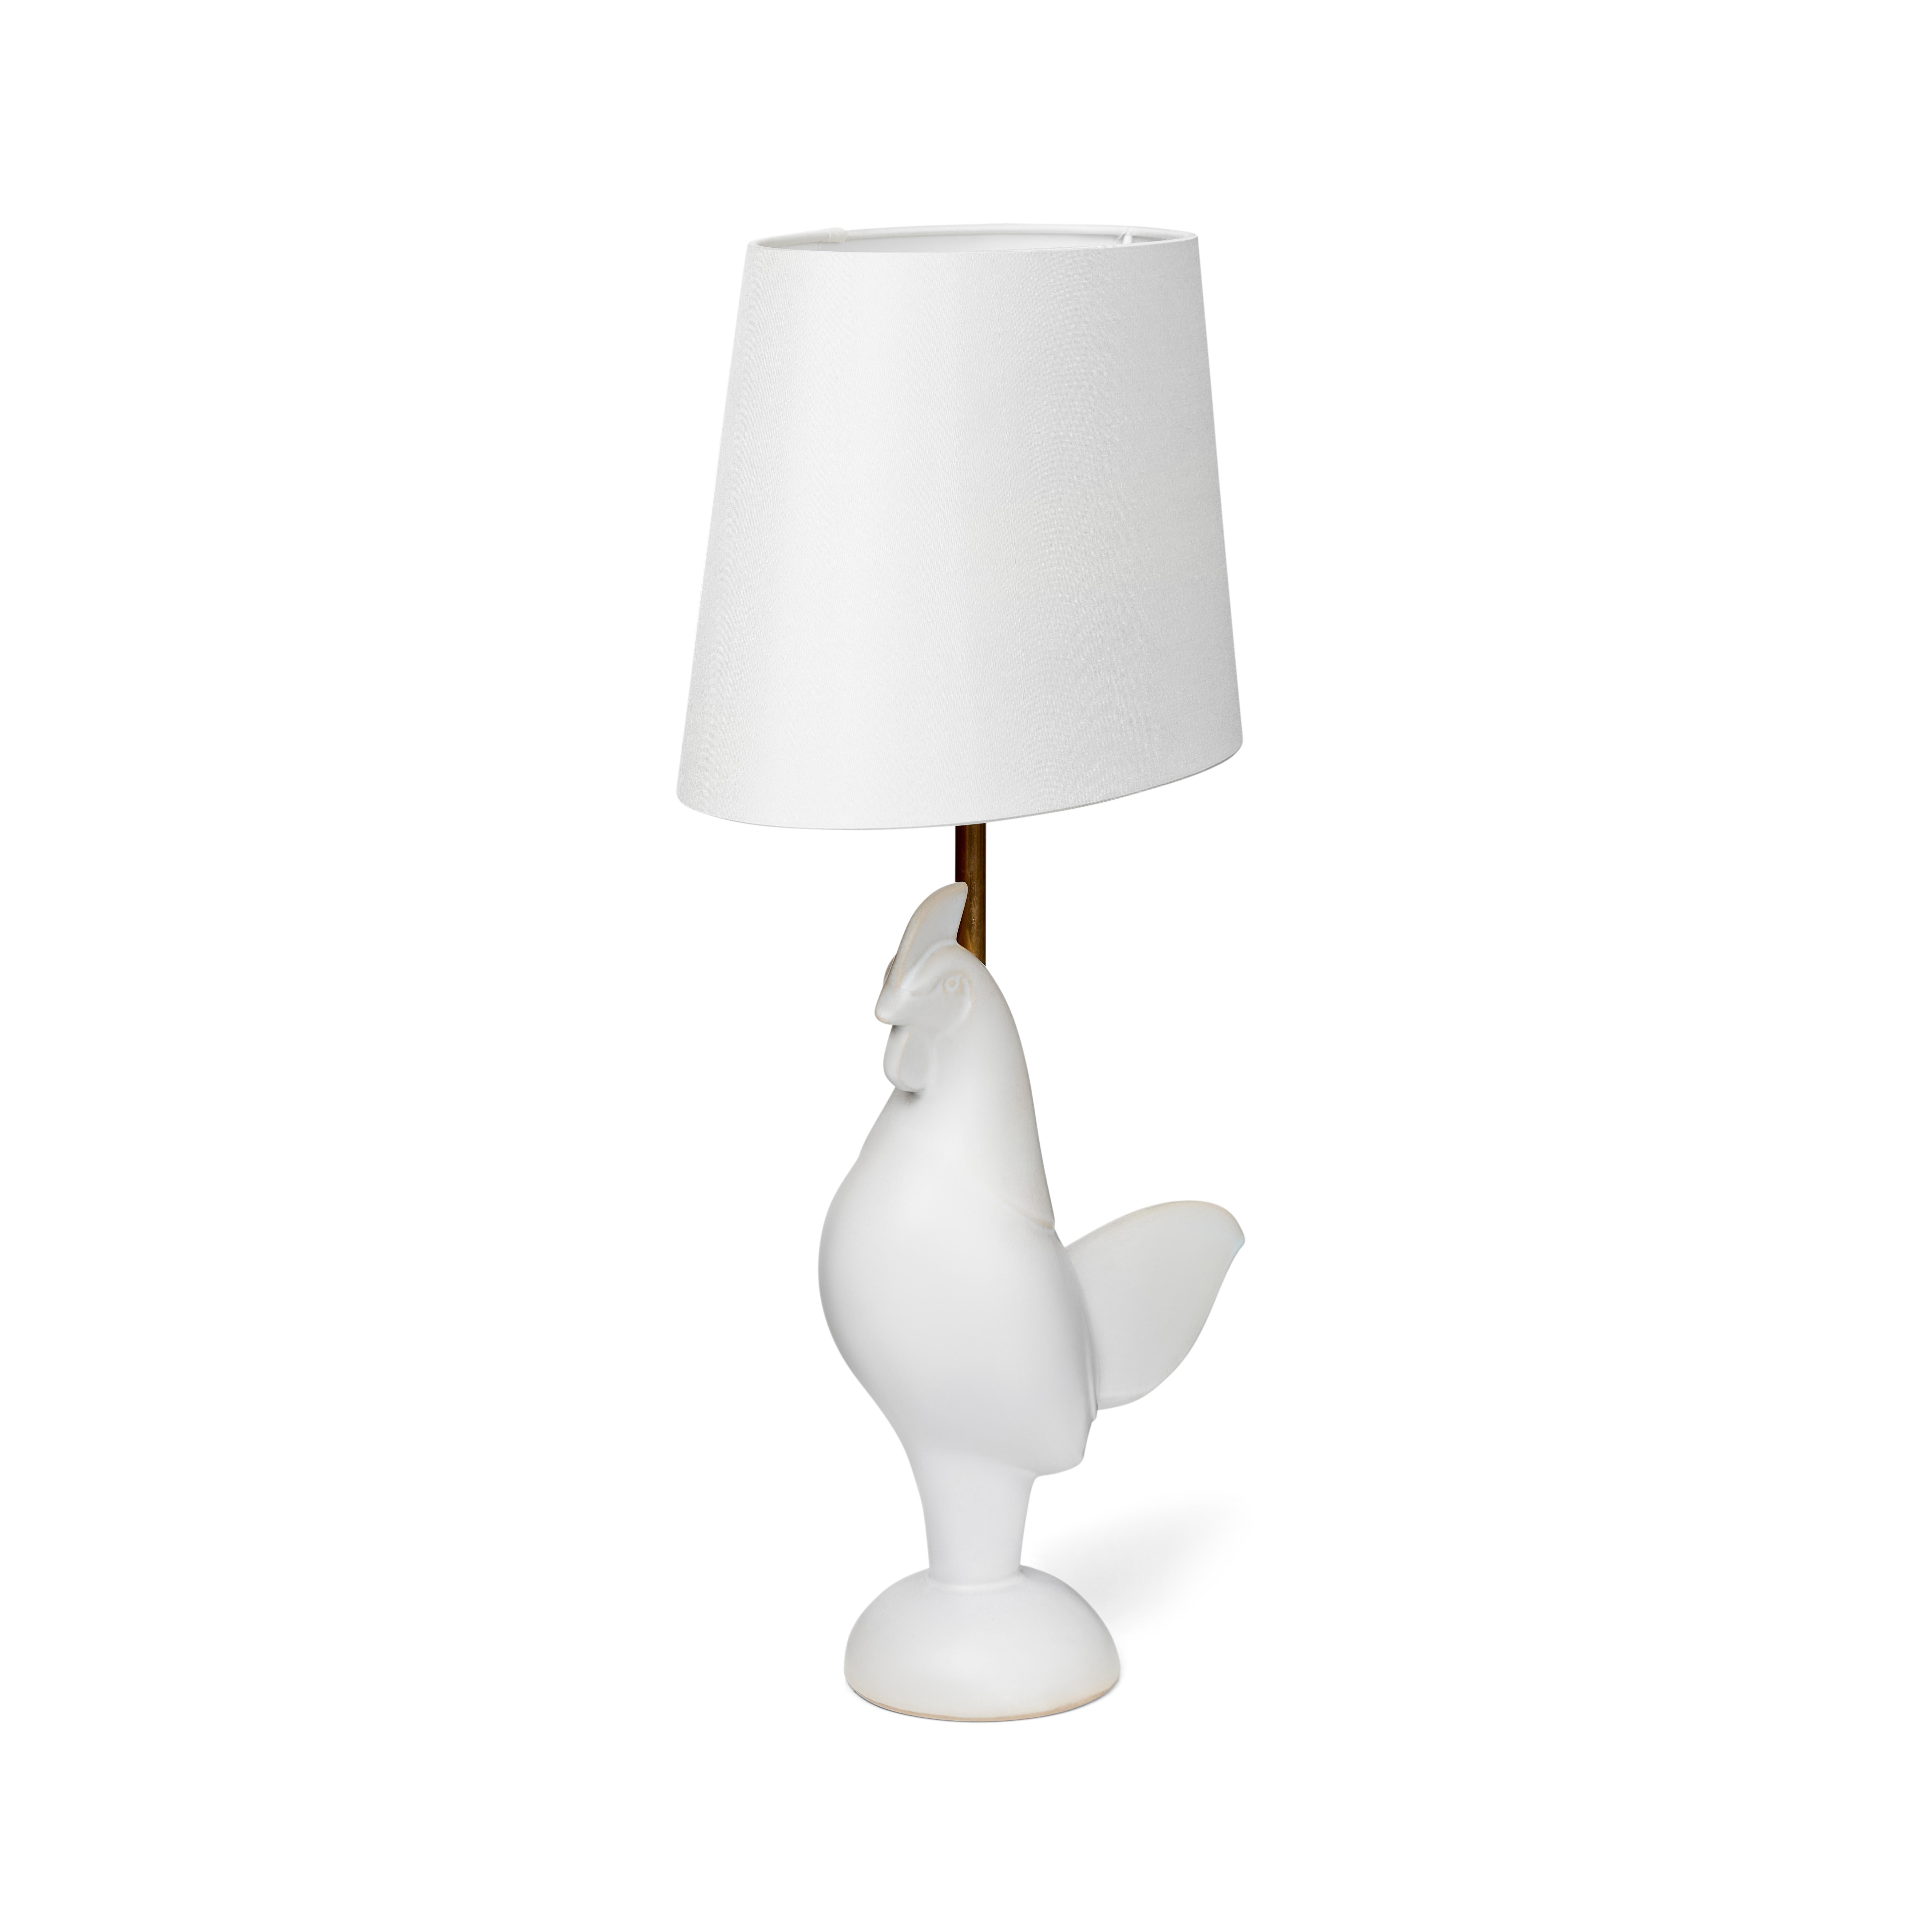 Matt glazed ceramic table lamp in the form of a chicken, signed to base Poterie Perigourdine.